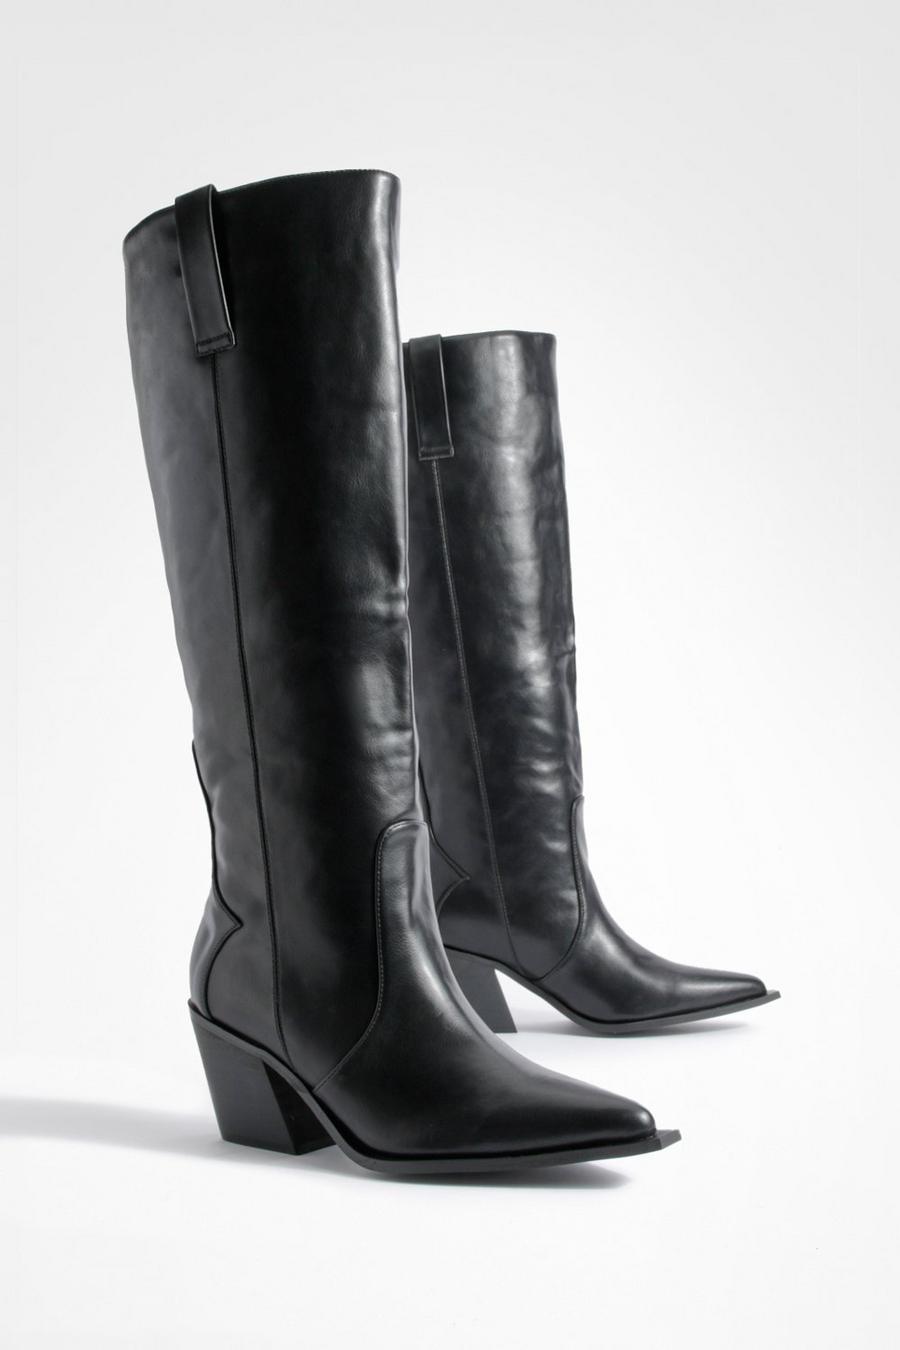 Black Wide Fit Western Cowboy Knee High Boots